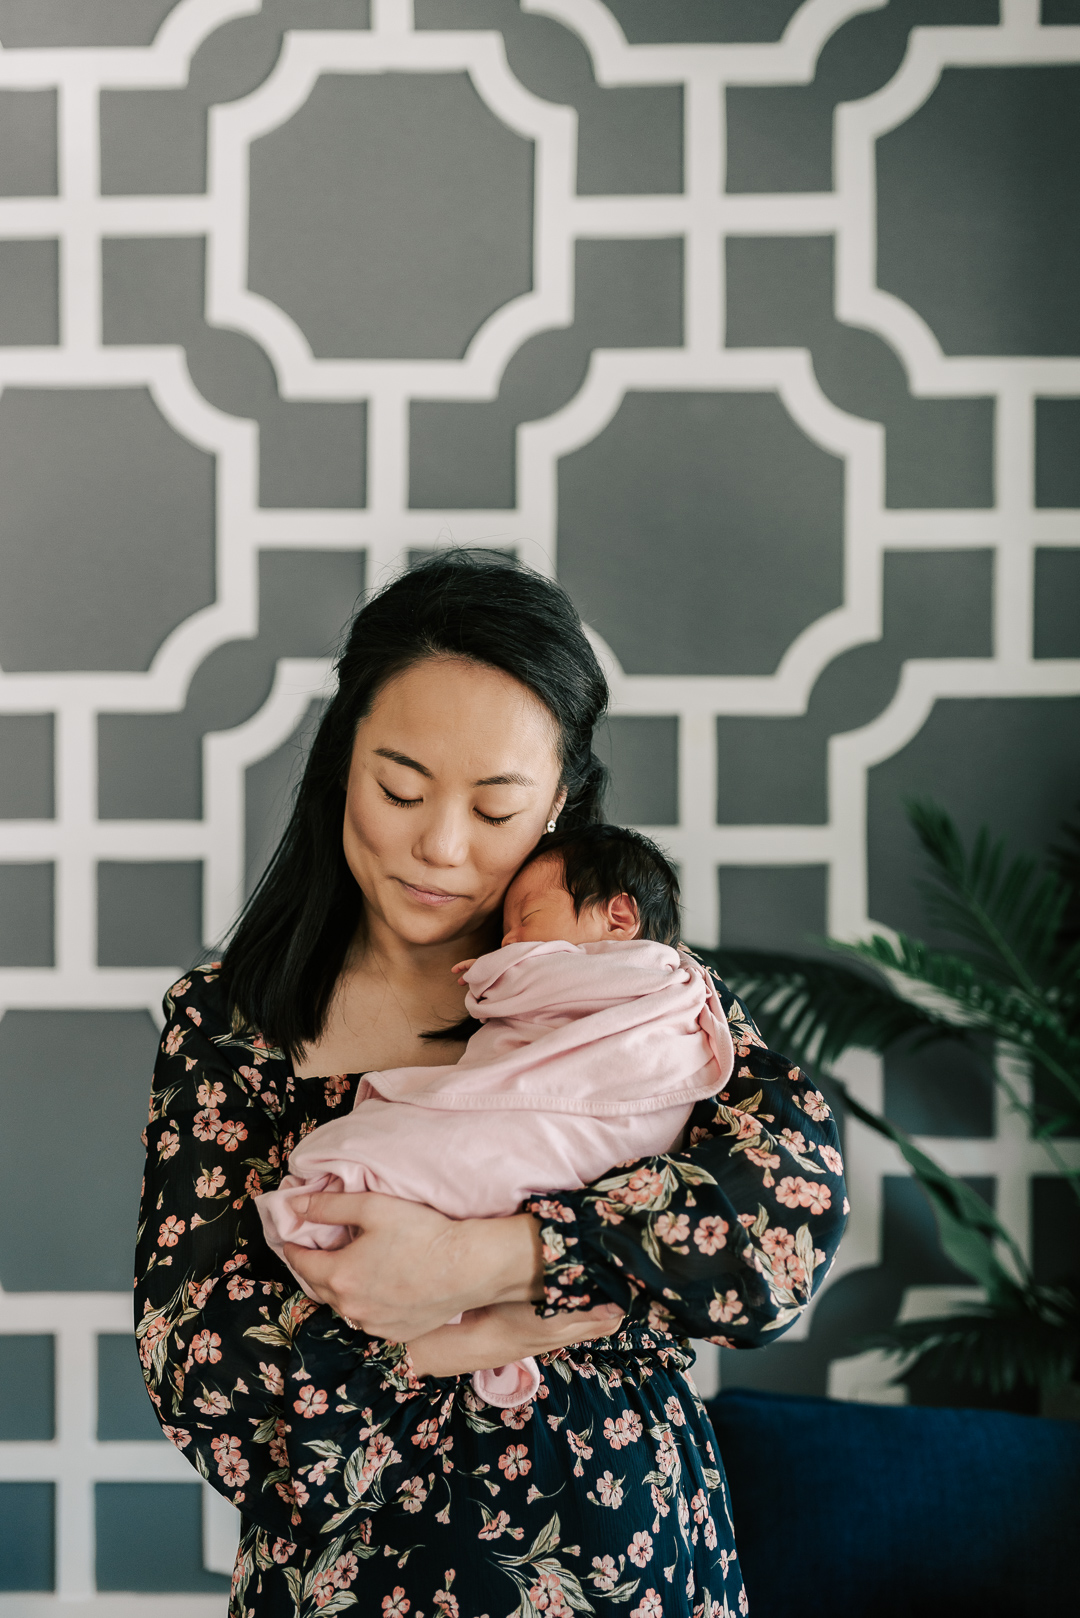 A happy new mother cradles her sleeping newborn baby against her cheek while standing inside after visiting northern virginia lactation consultants